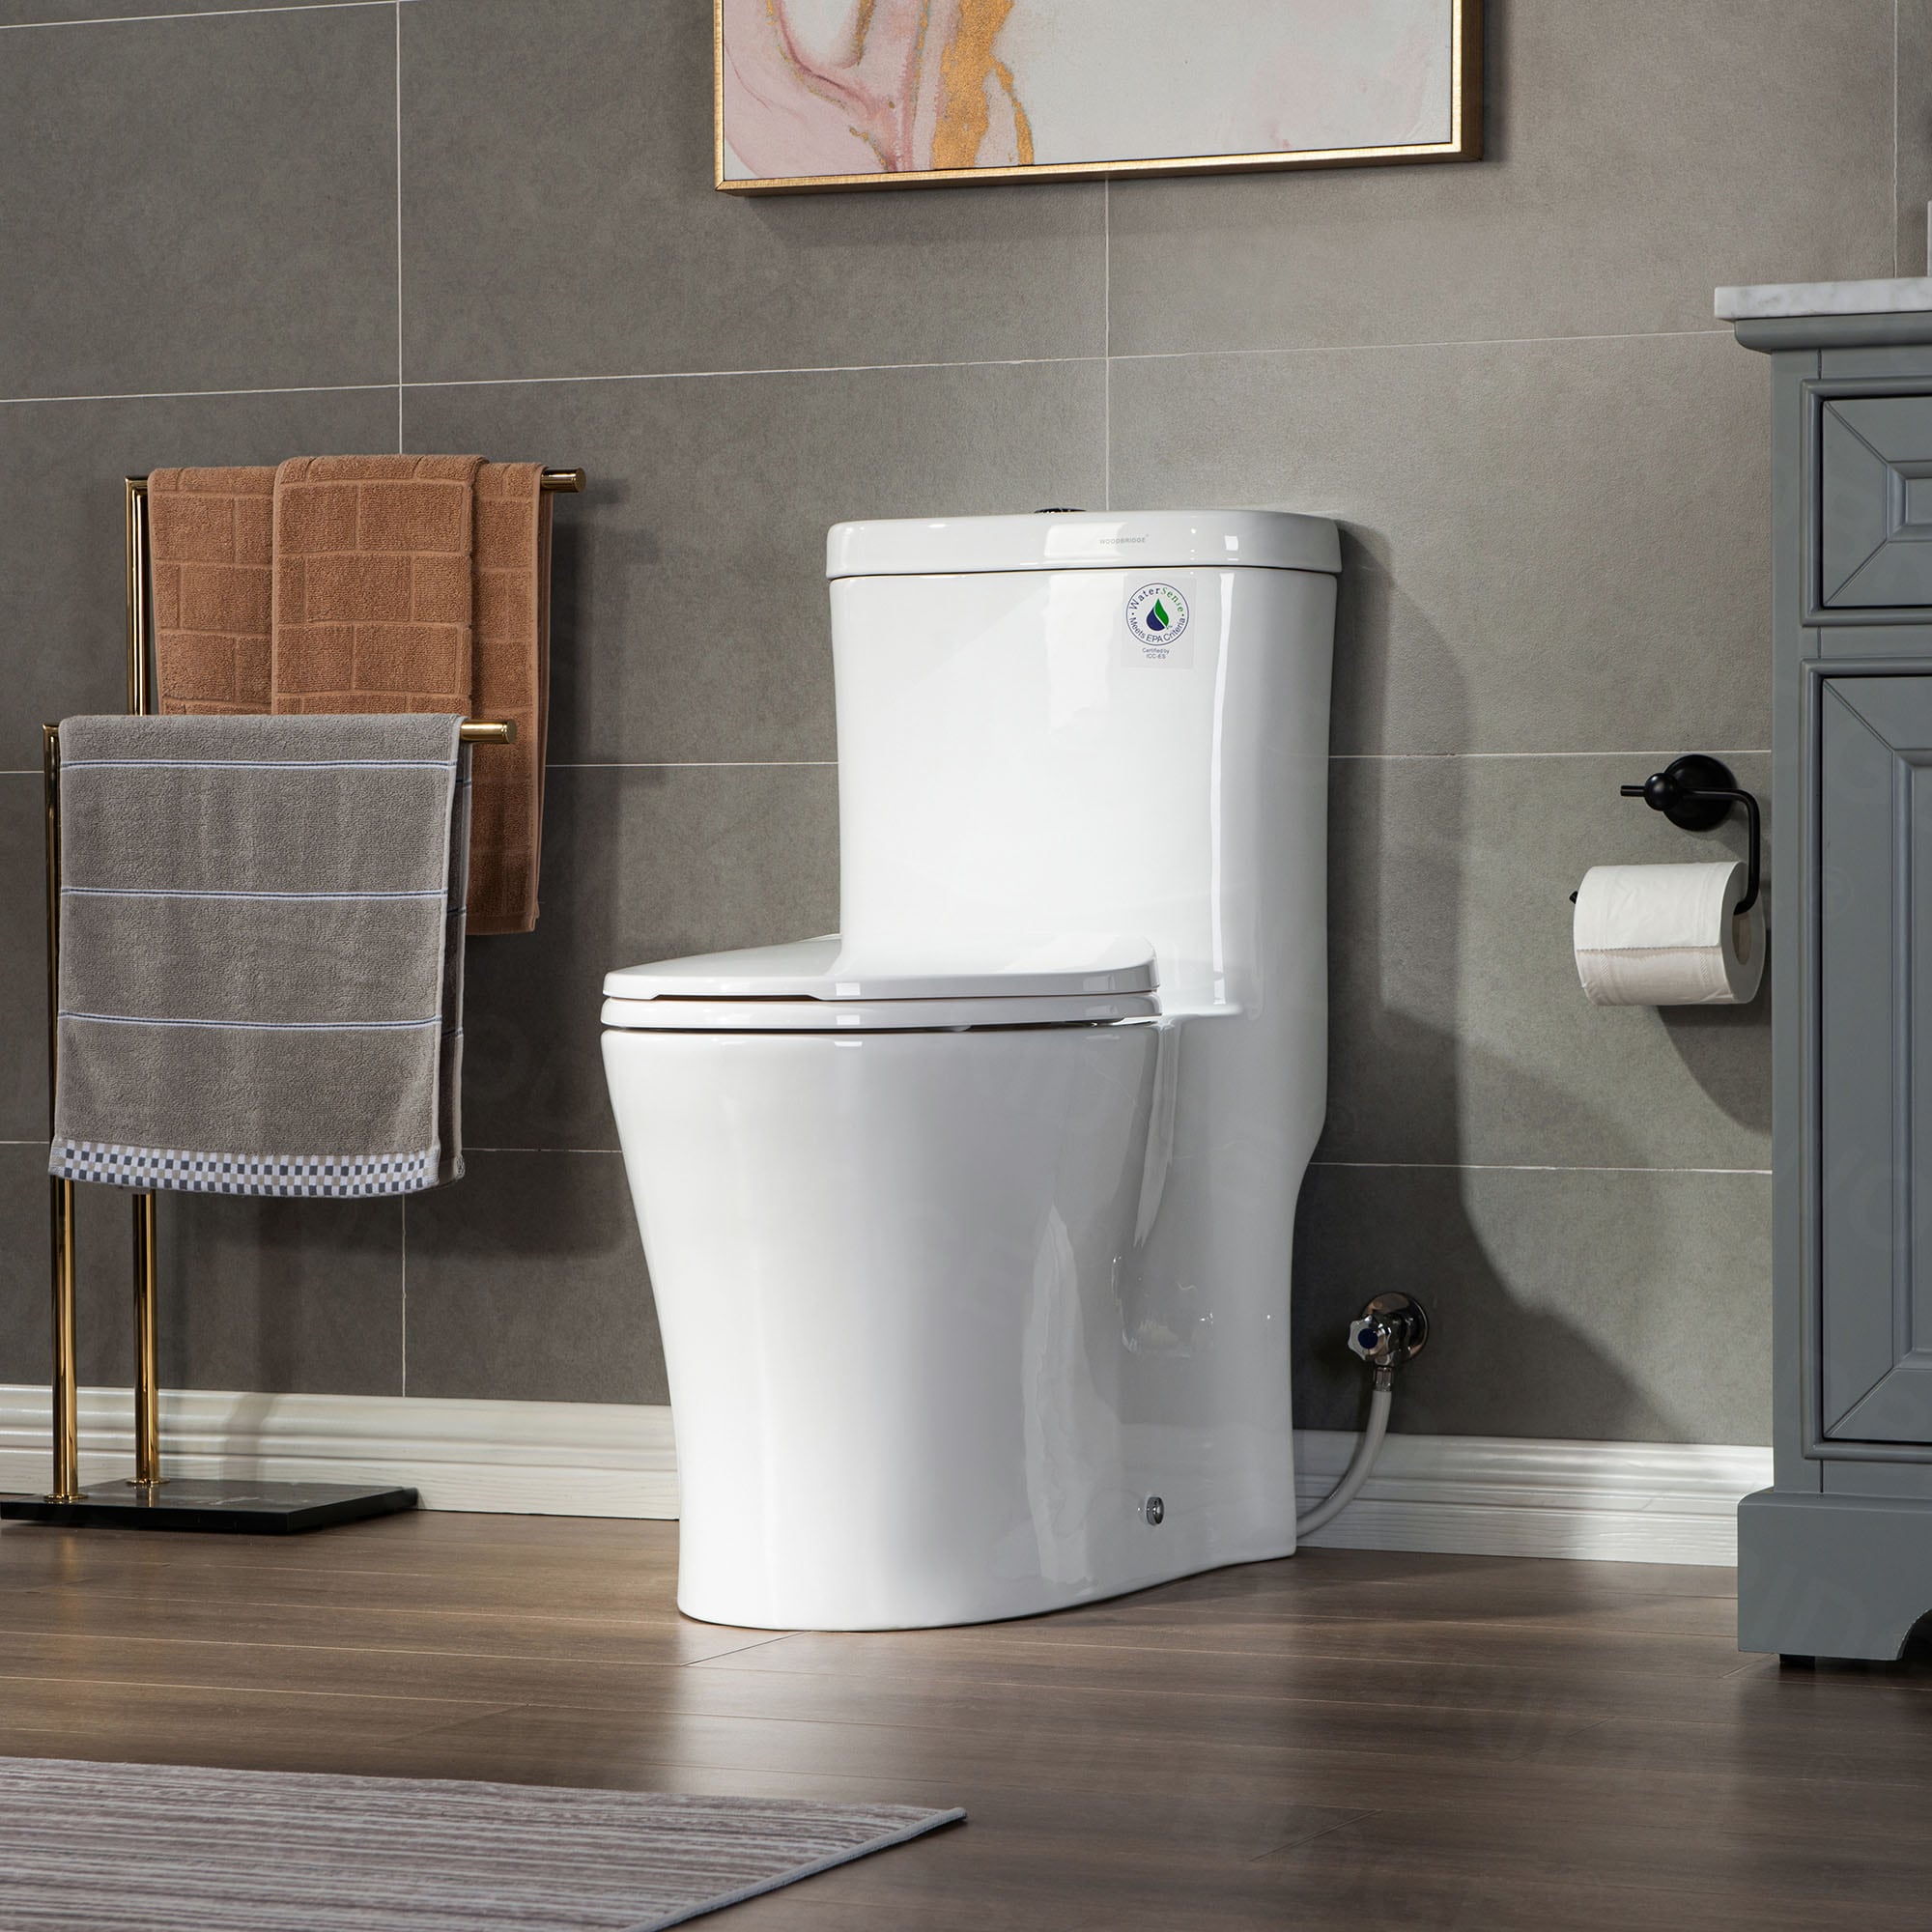 Simple Project 19 in. Tall Toilet 2-Piece 1.0/1.6 GPF Rear-Outlet